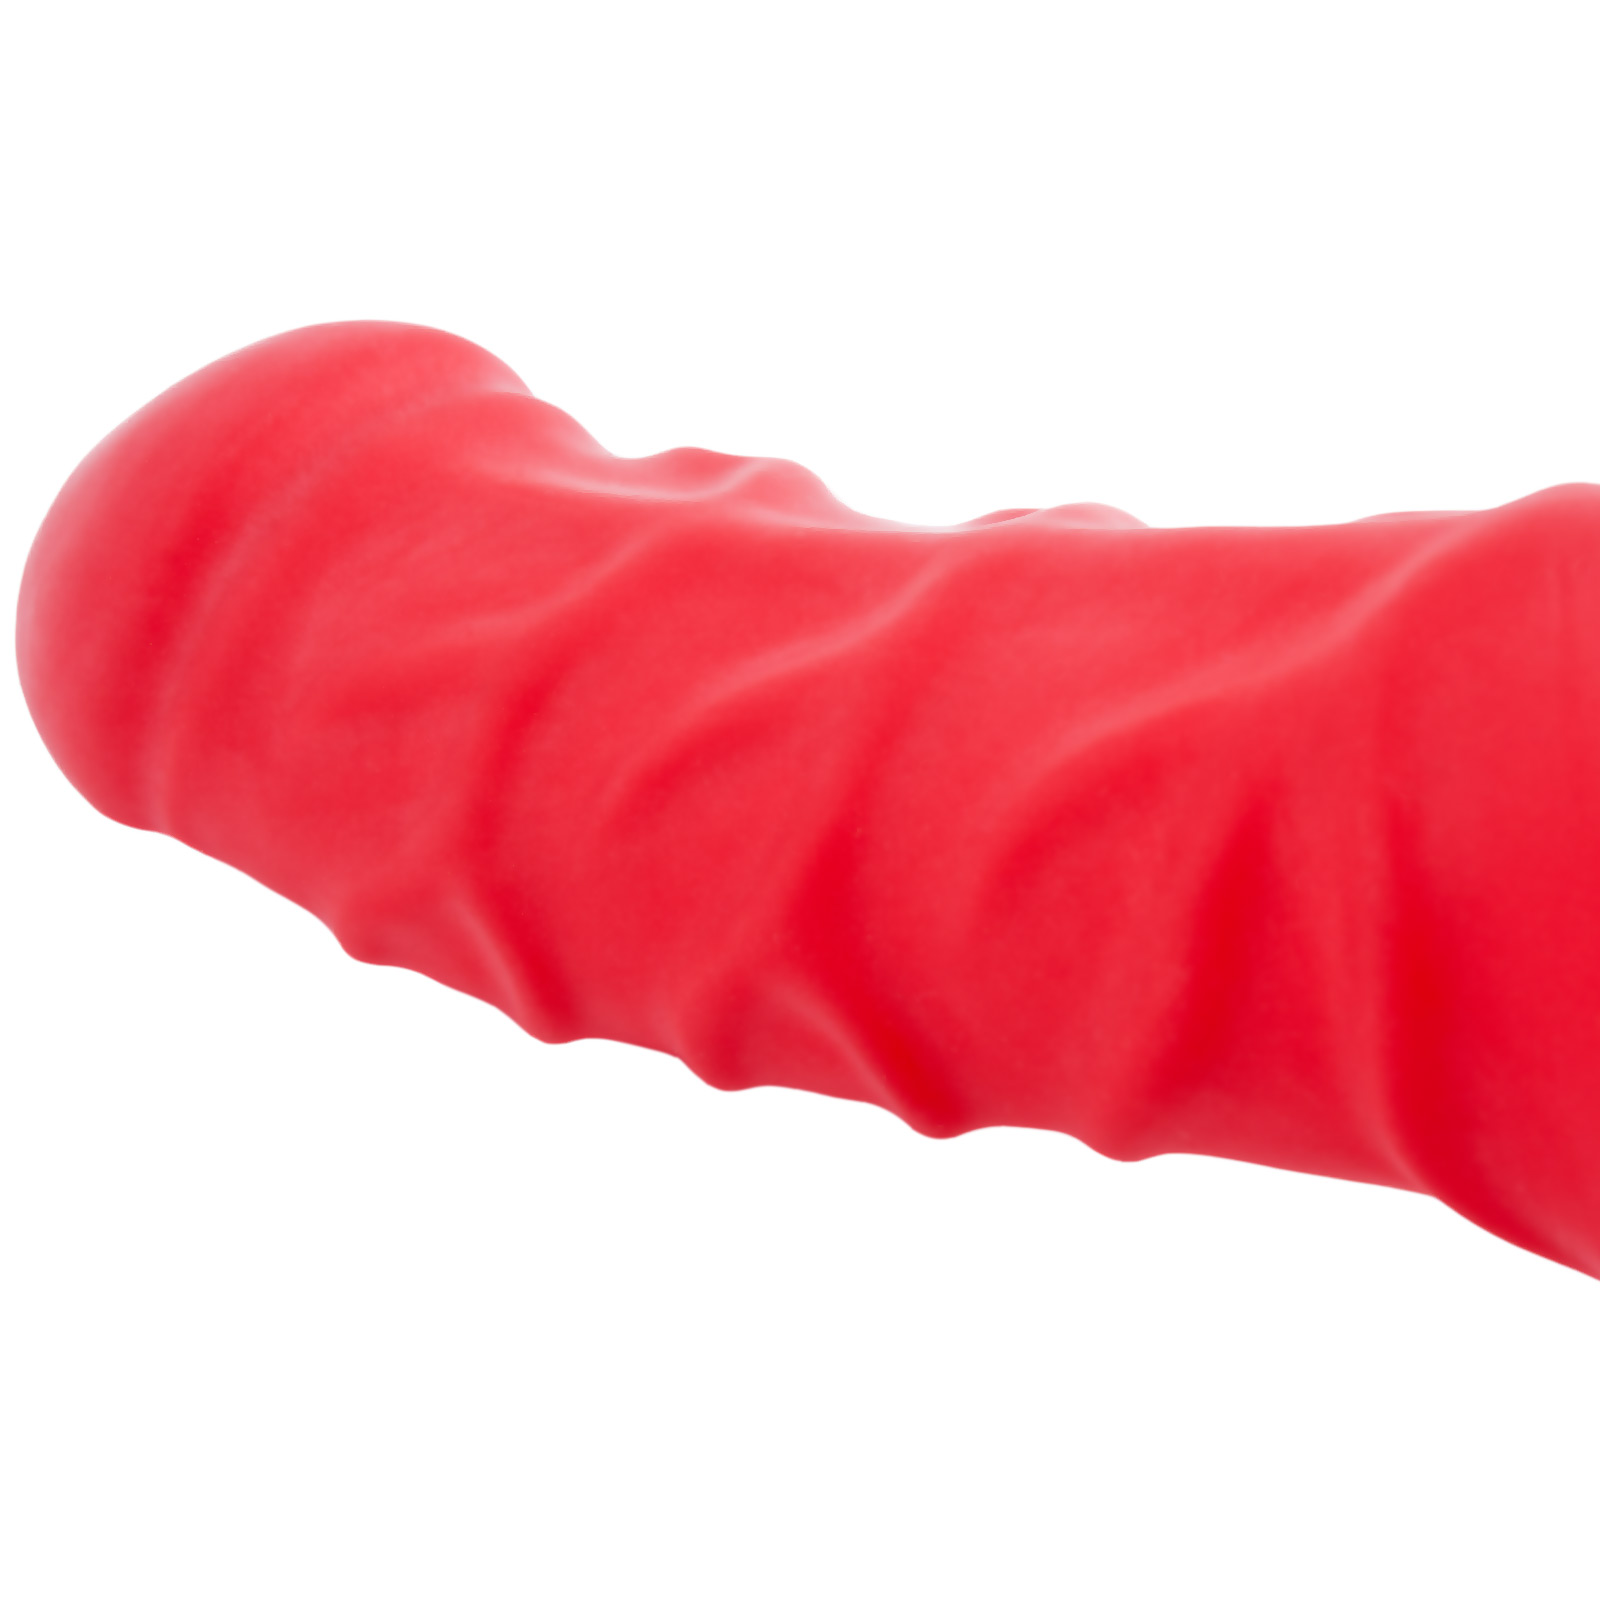 Toylie Latex Penis Sleeve «FRANZ» red, with strong veins and molded scrotum